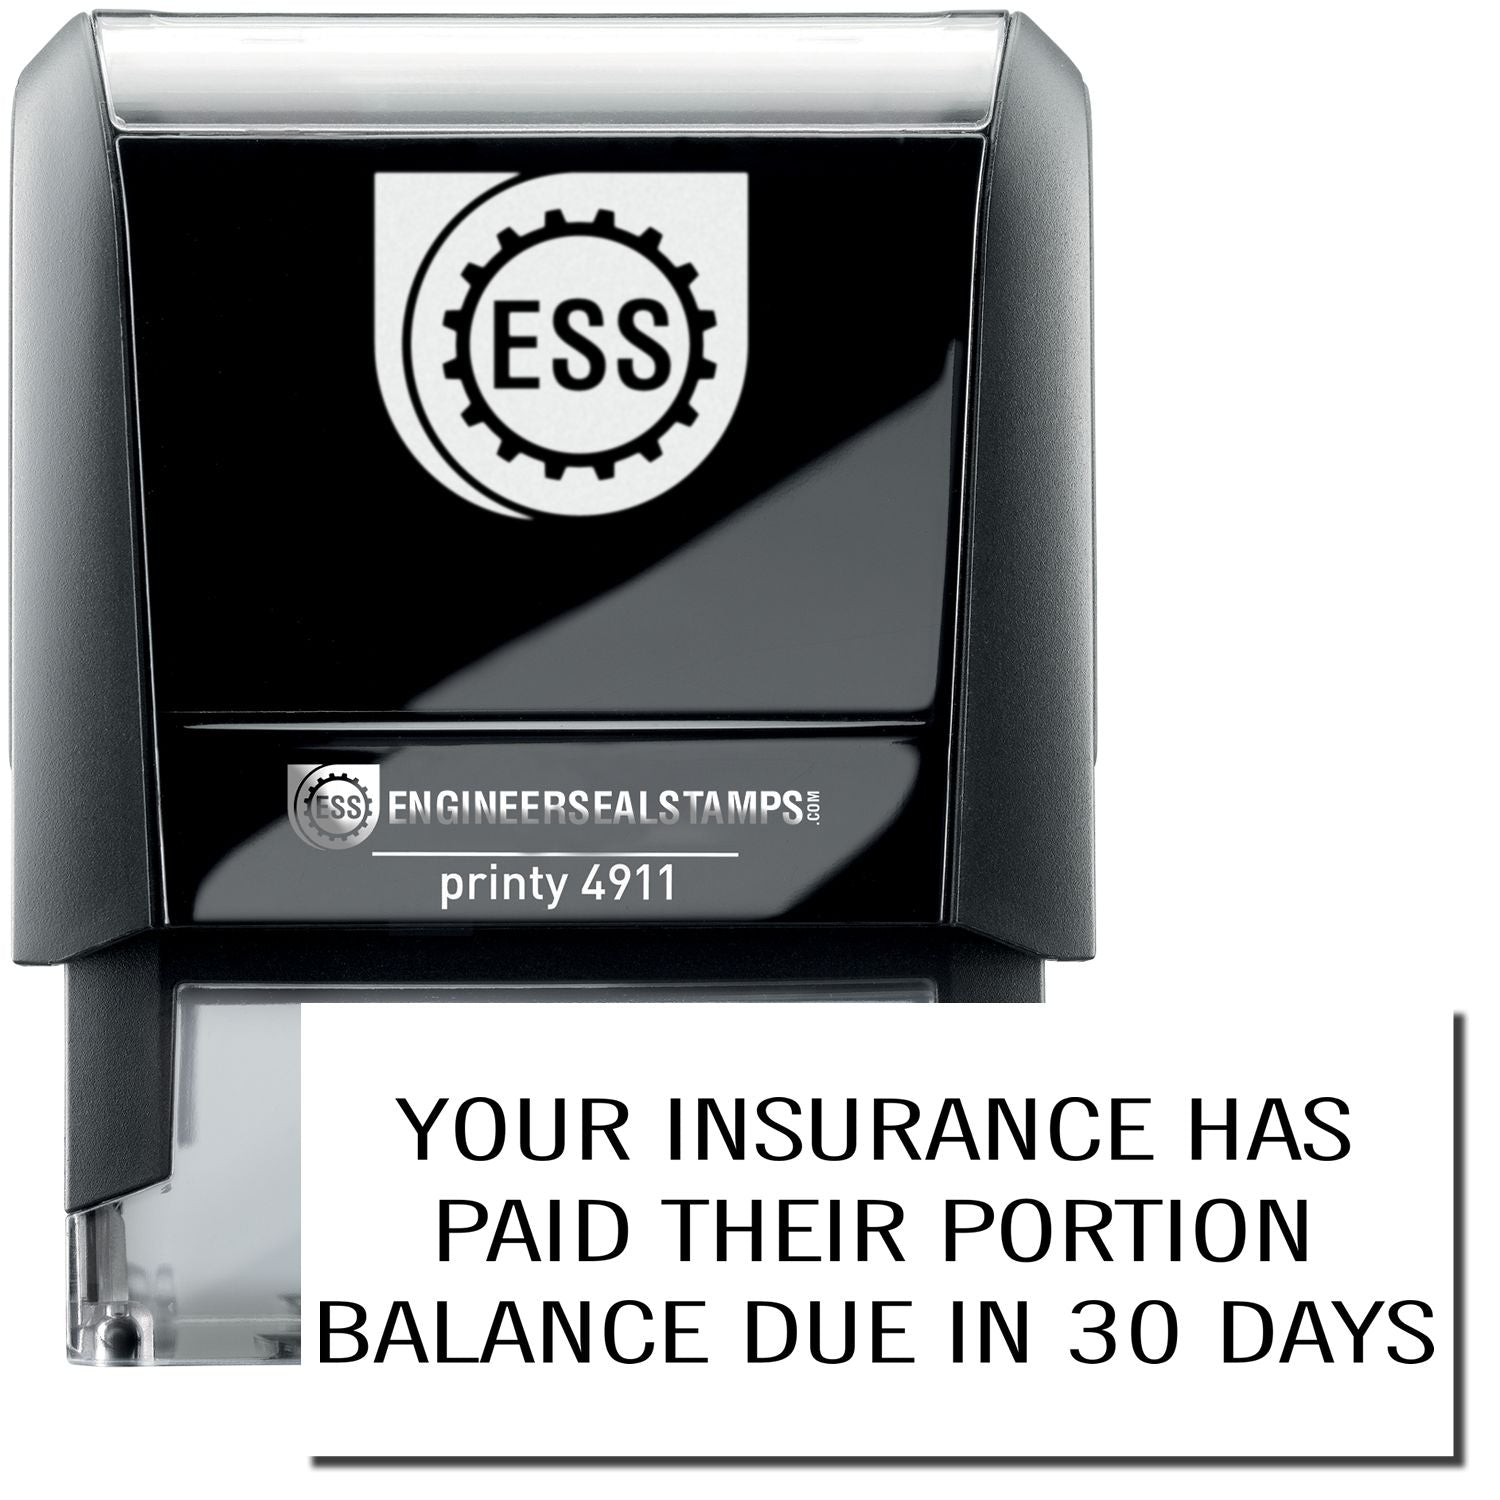 A self-inking stamp with a stamped image showing how the text "YOUR INSURANCE HAS PAID THEIR PORTION BALANCE DUE IN 30 DAYS" is displayed after stamping.